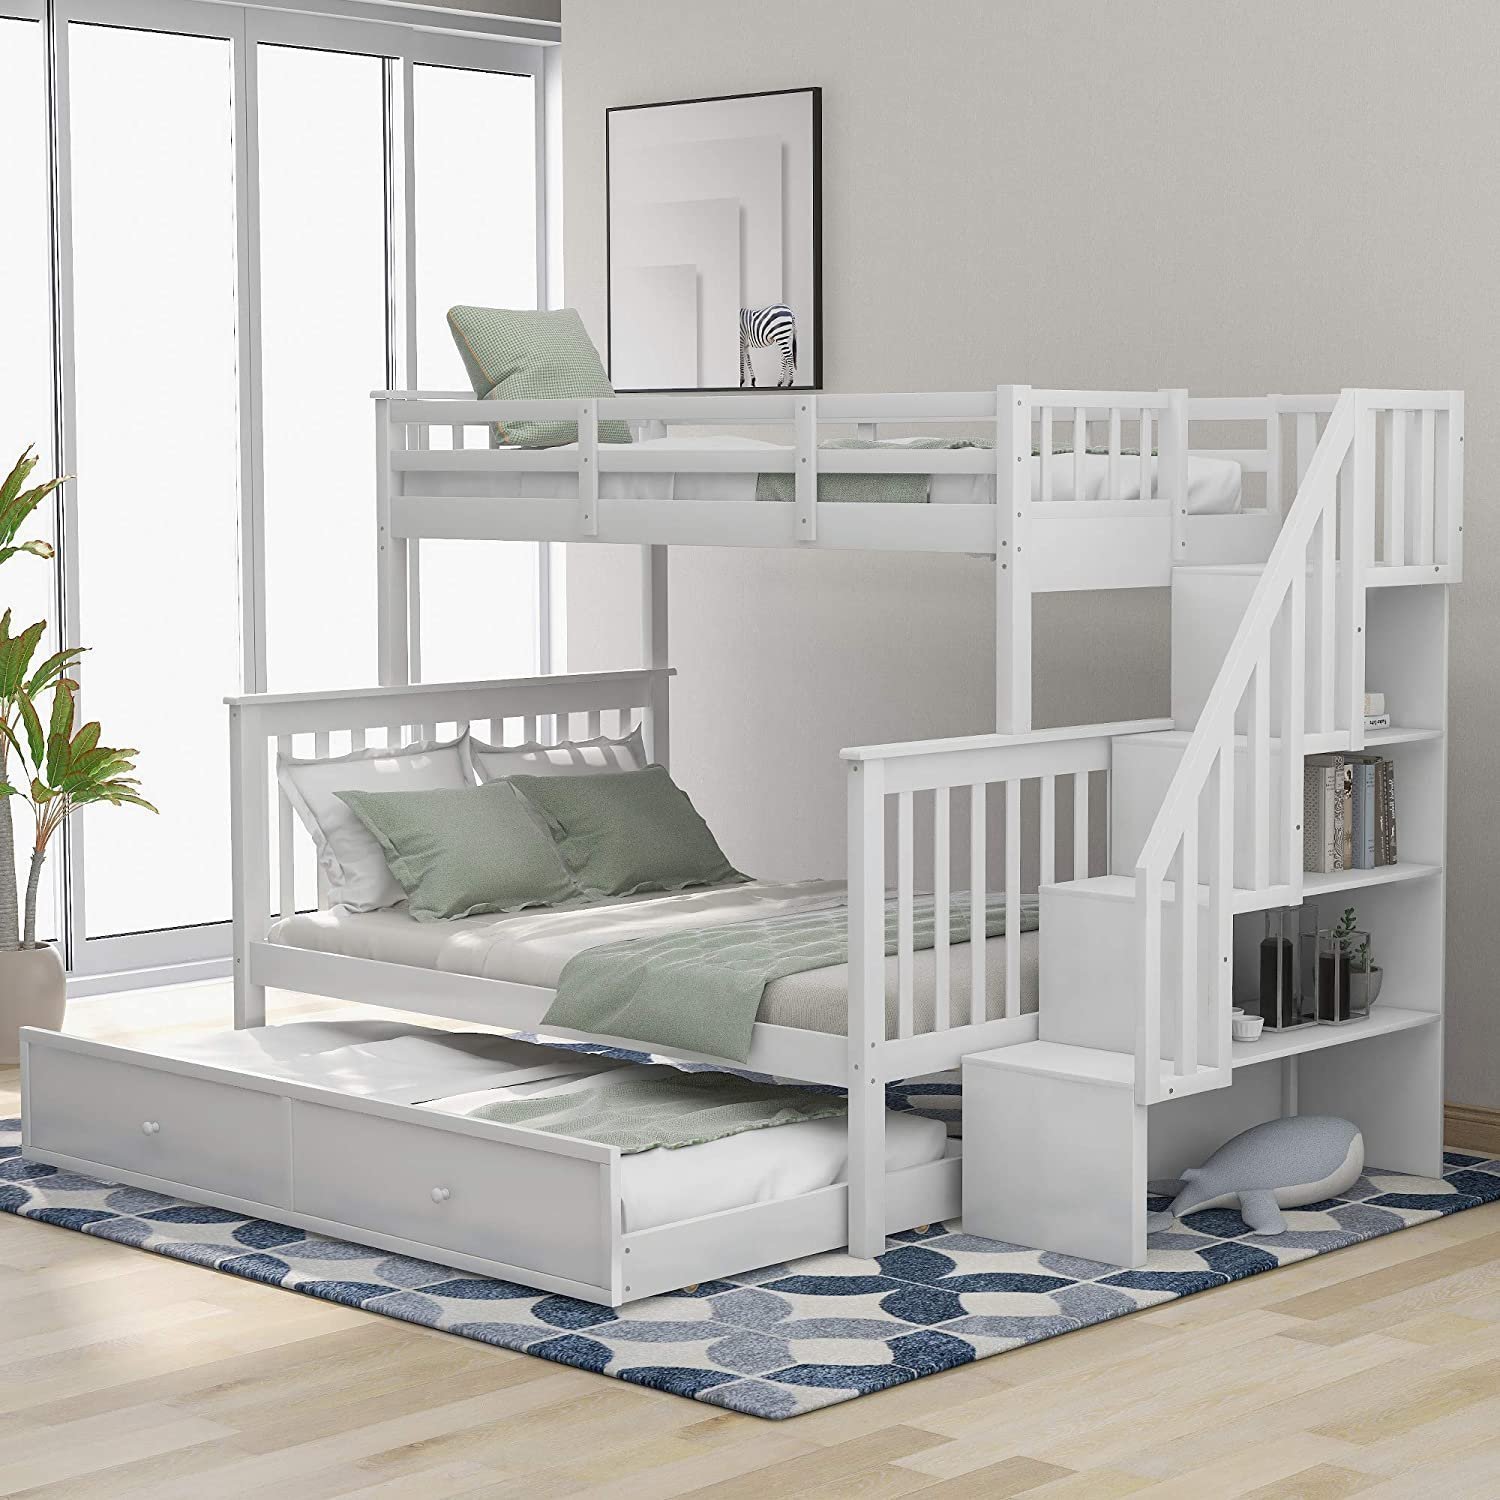 Twin Over Full Bunk Bed With Drawer 4, Clearance Bunk Beds Twin Over Full